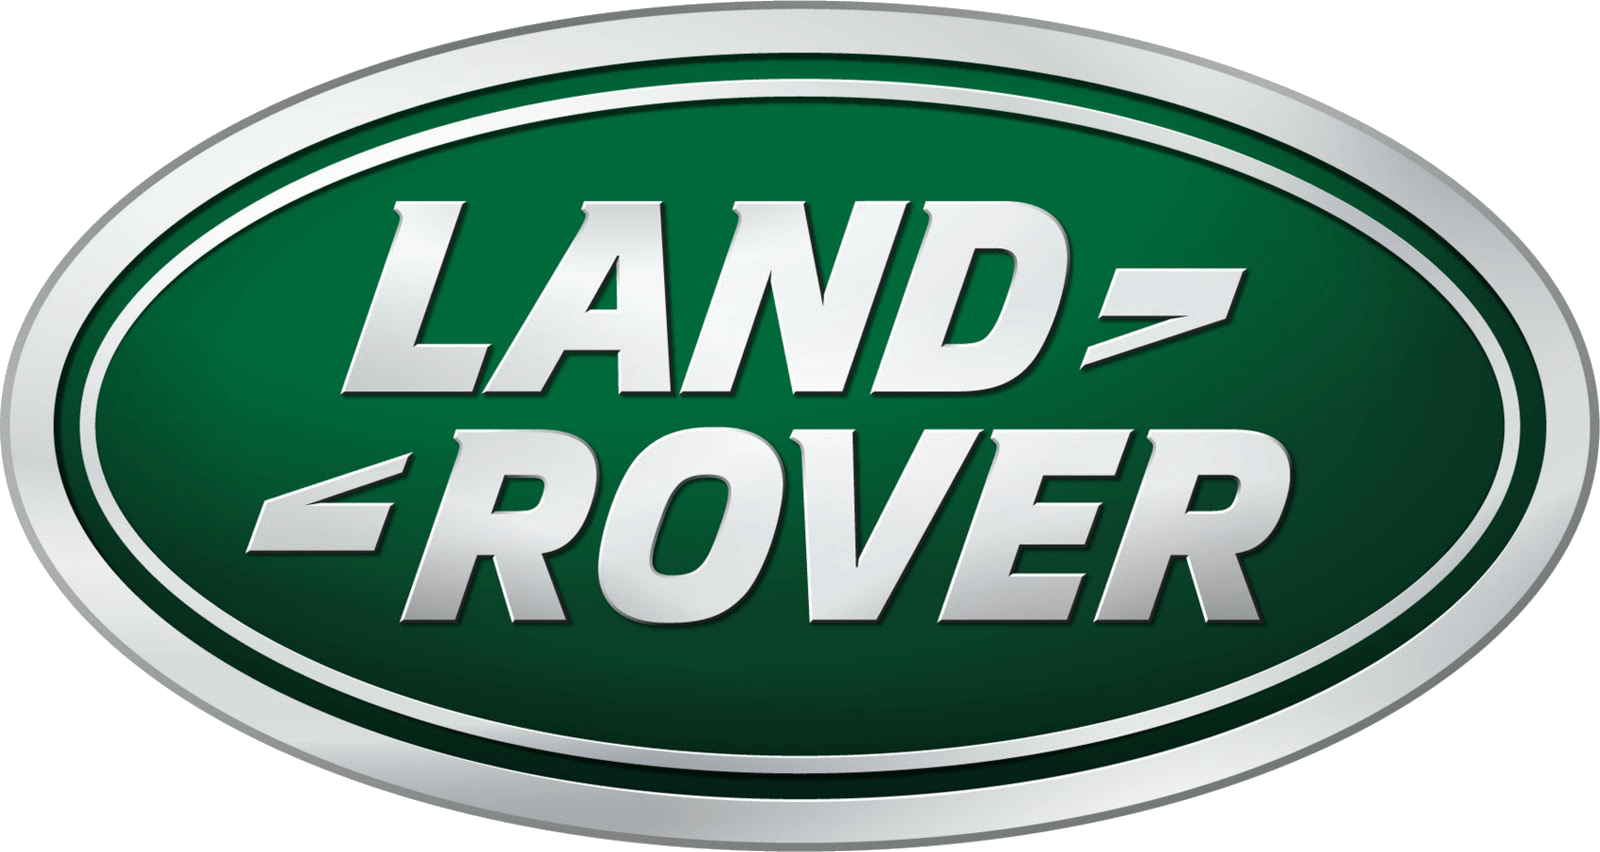 Green Oval Car Logo - Land Rover Logo, Land Rover Car Symbol Meaning and History | Car ...